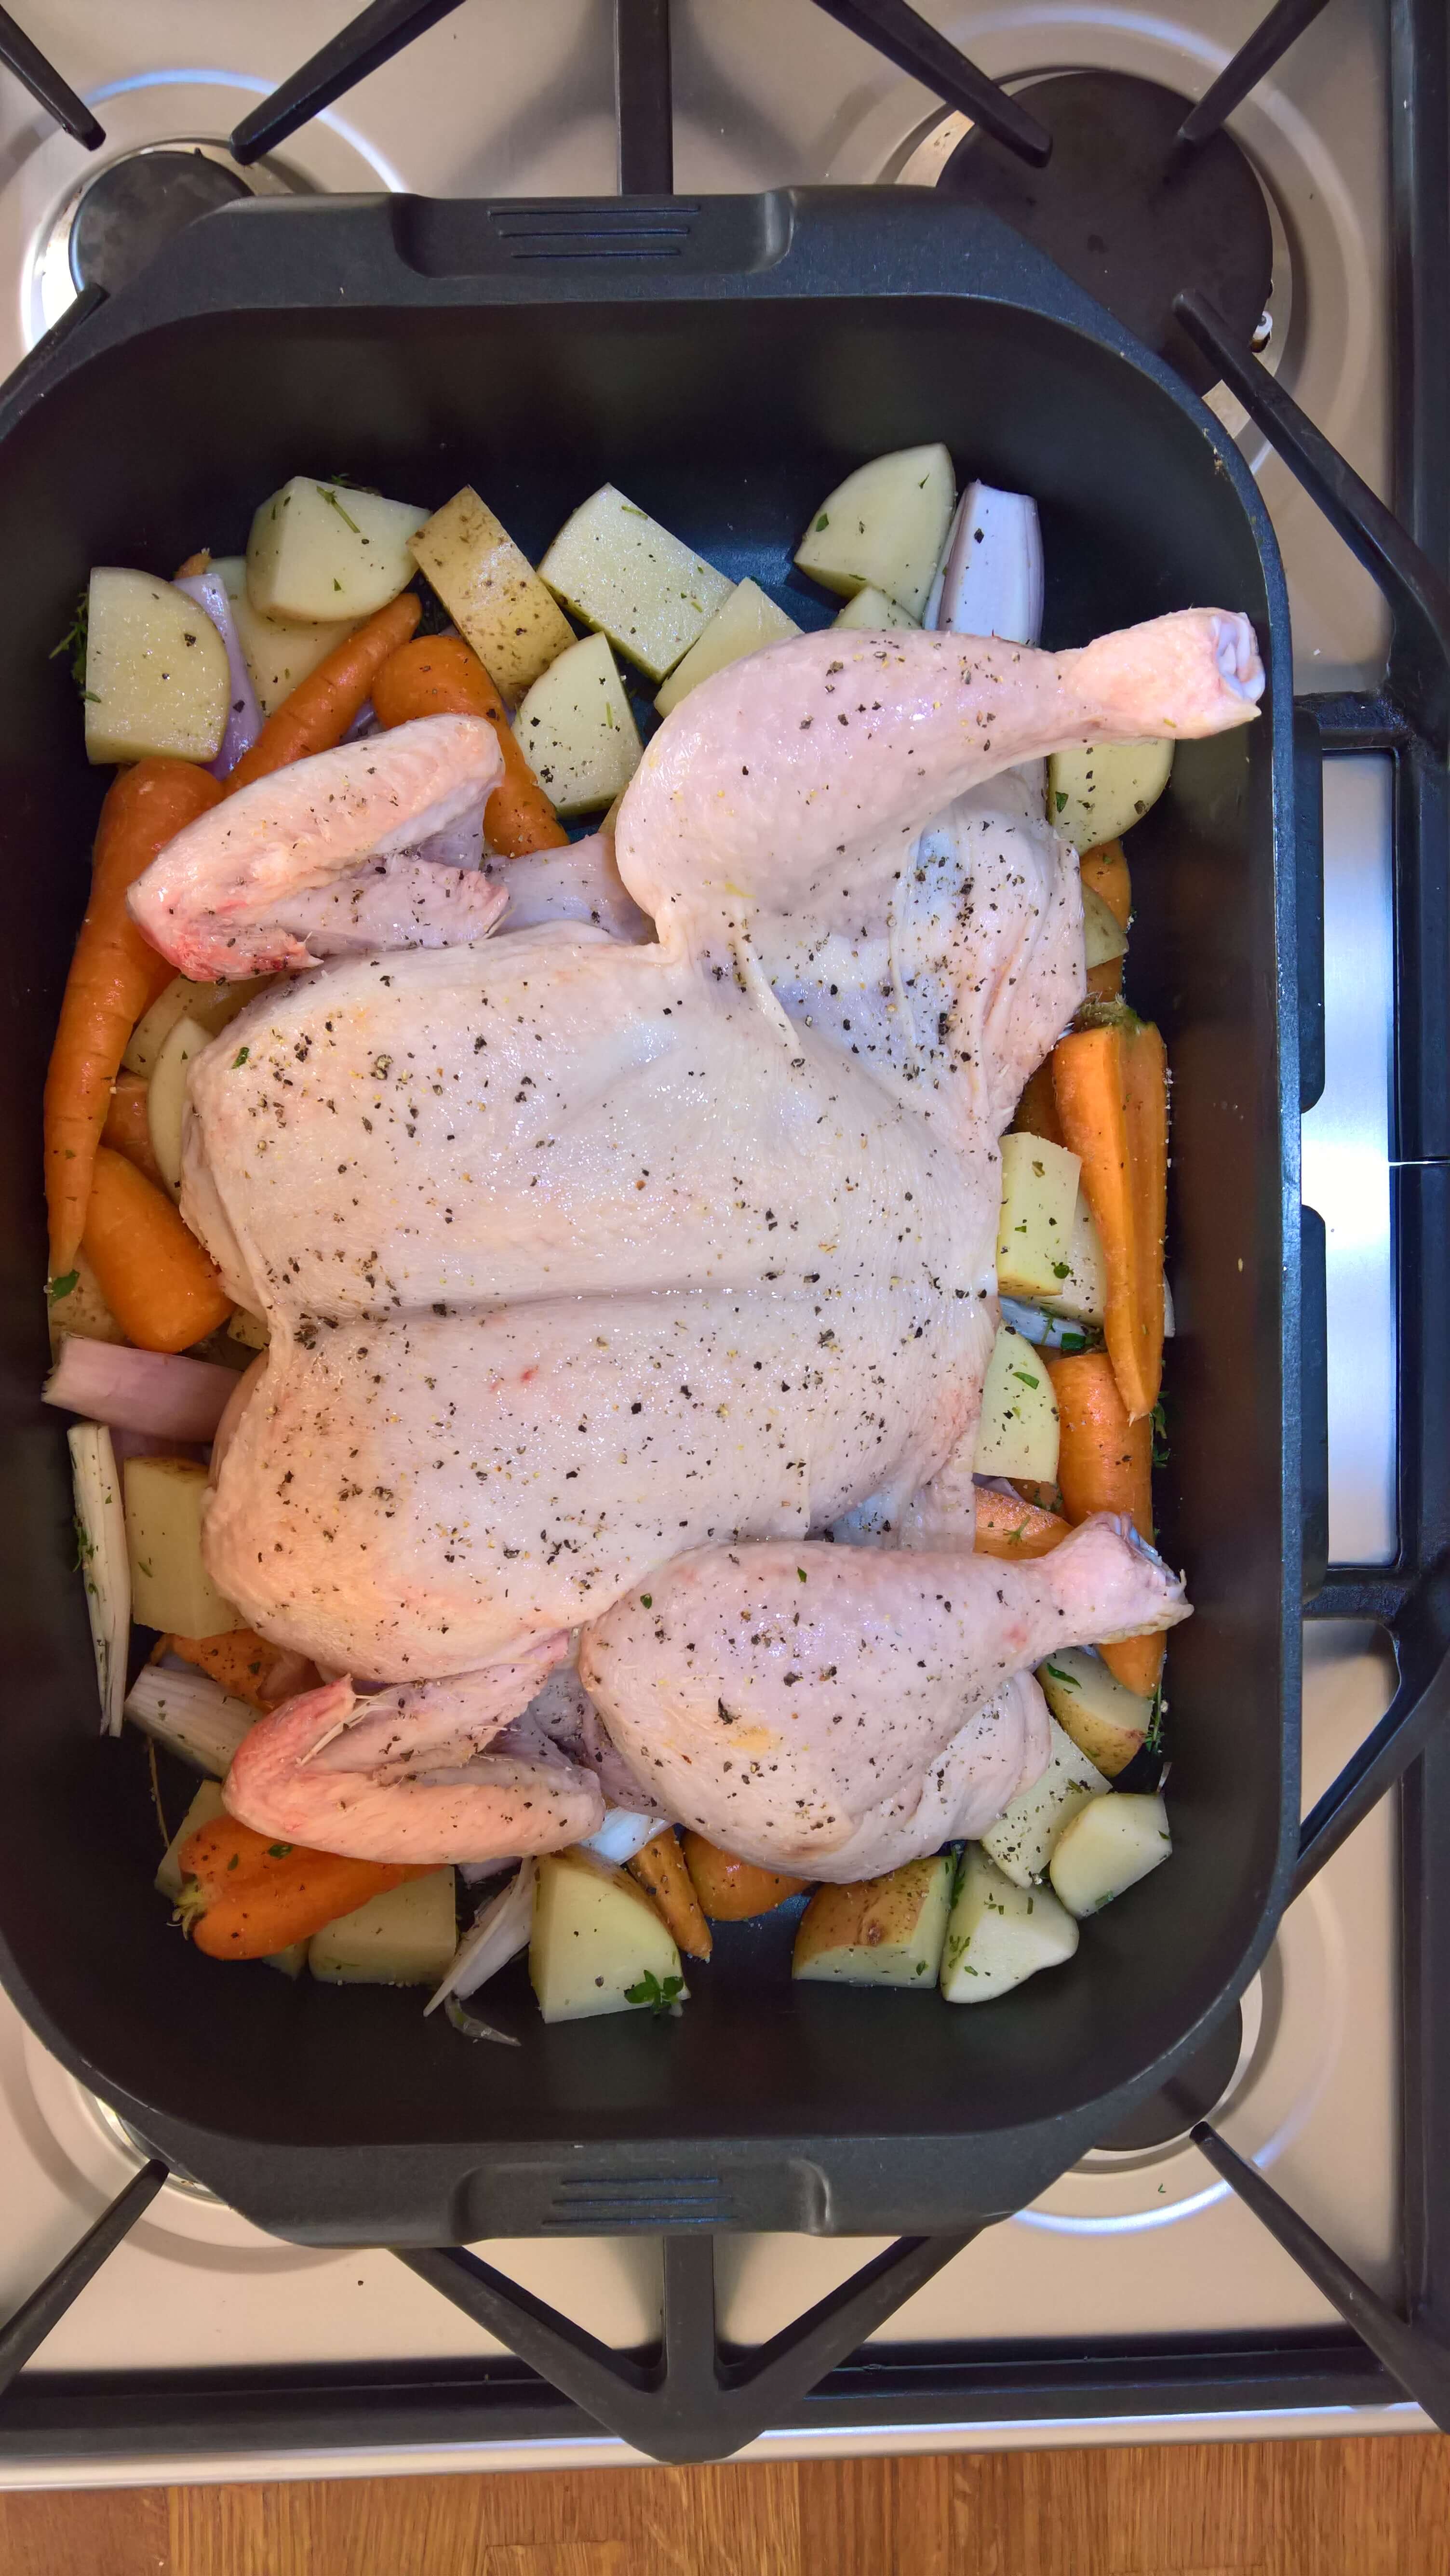 One spatchcocked chicken!